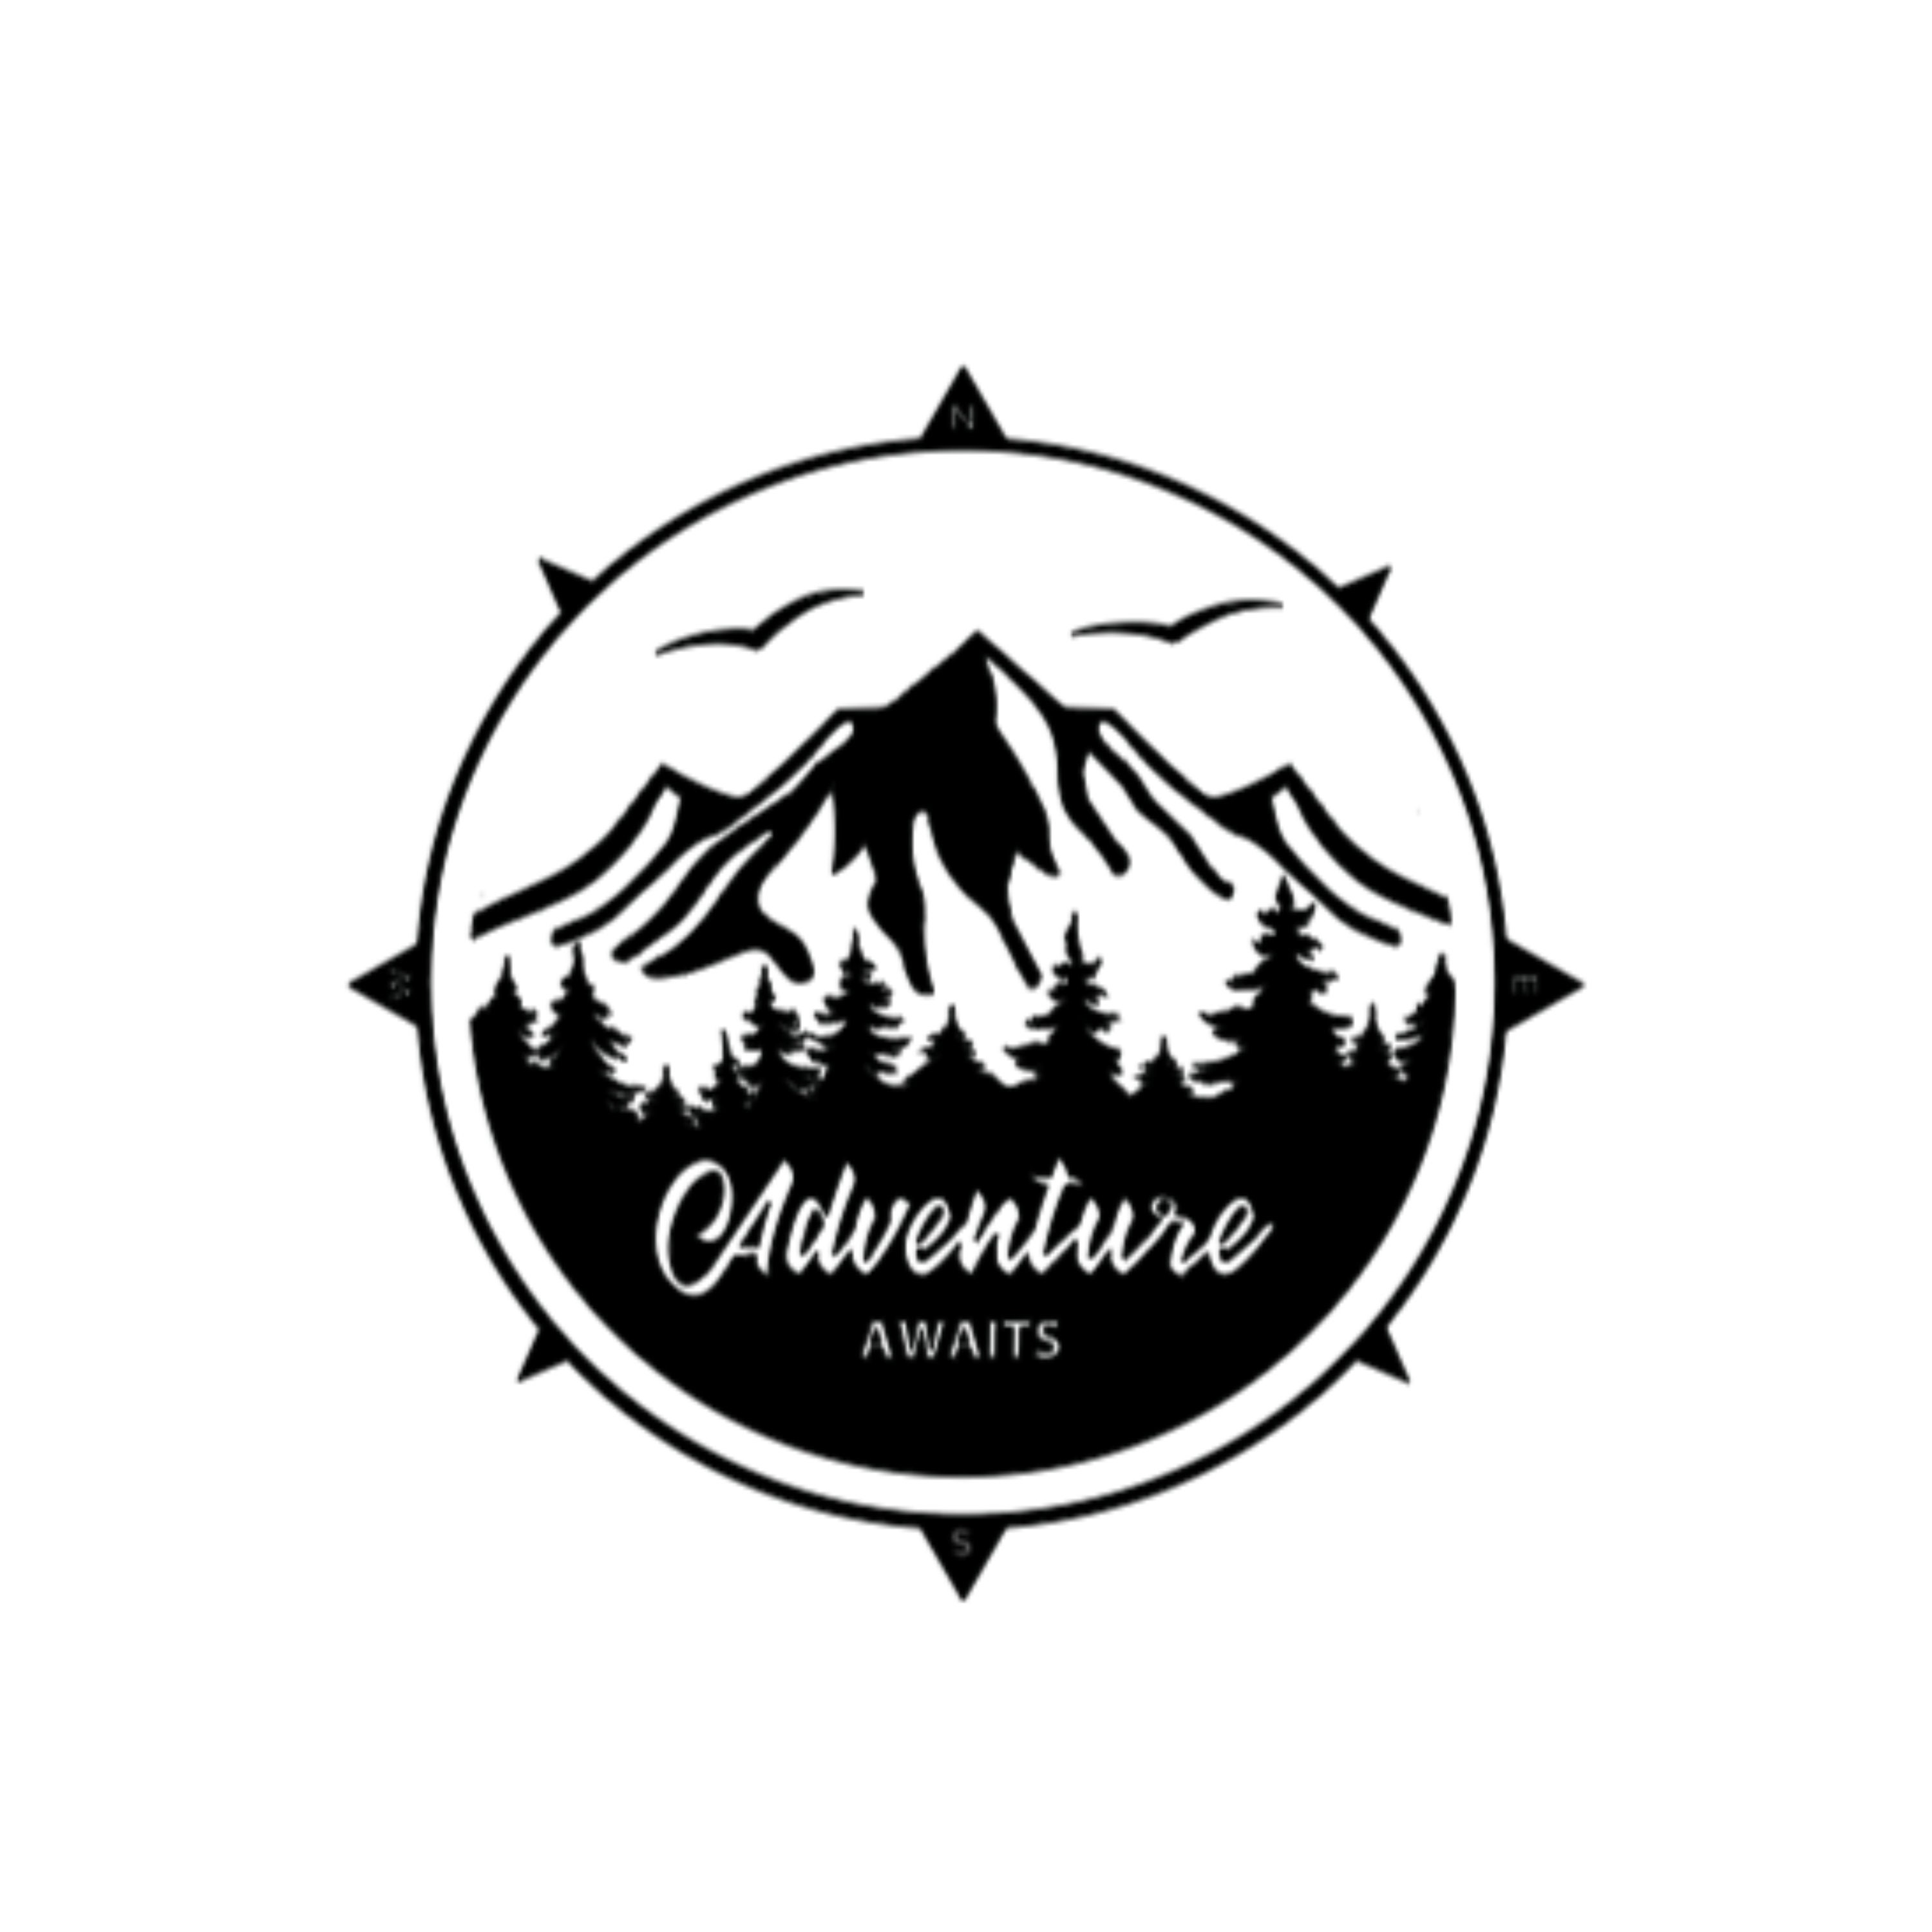 Camping Decal Adventure Decal Camper Stickers Adventure - Etsy